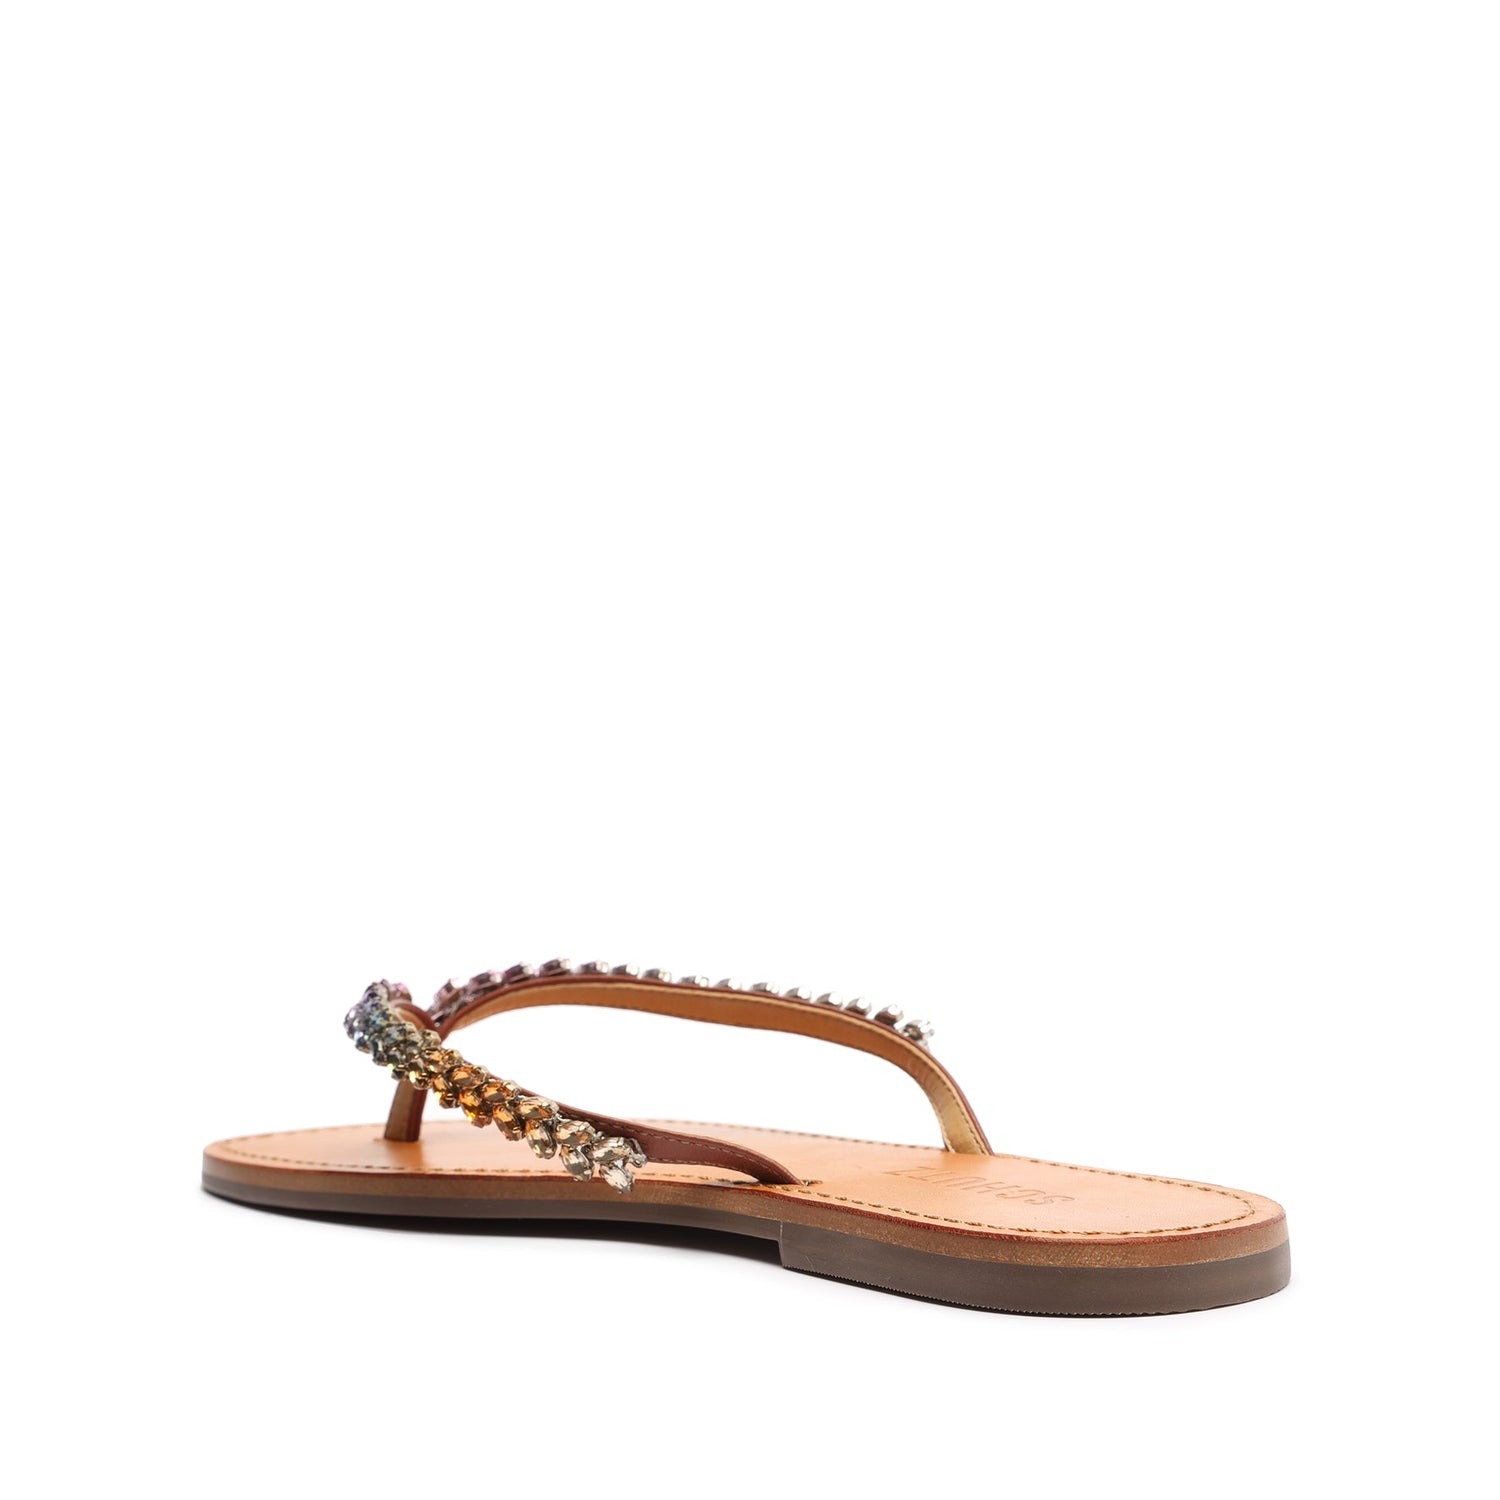 Belle Nappa Leather Sandal Flats OLD    - Schutz Shoes